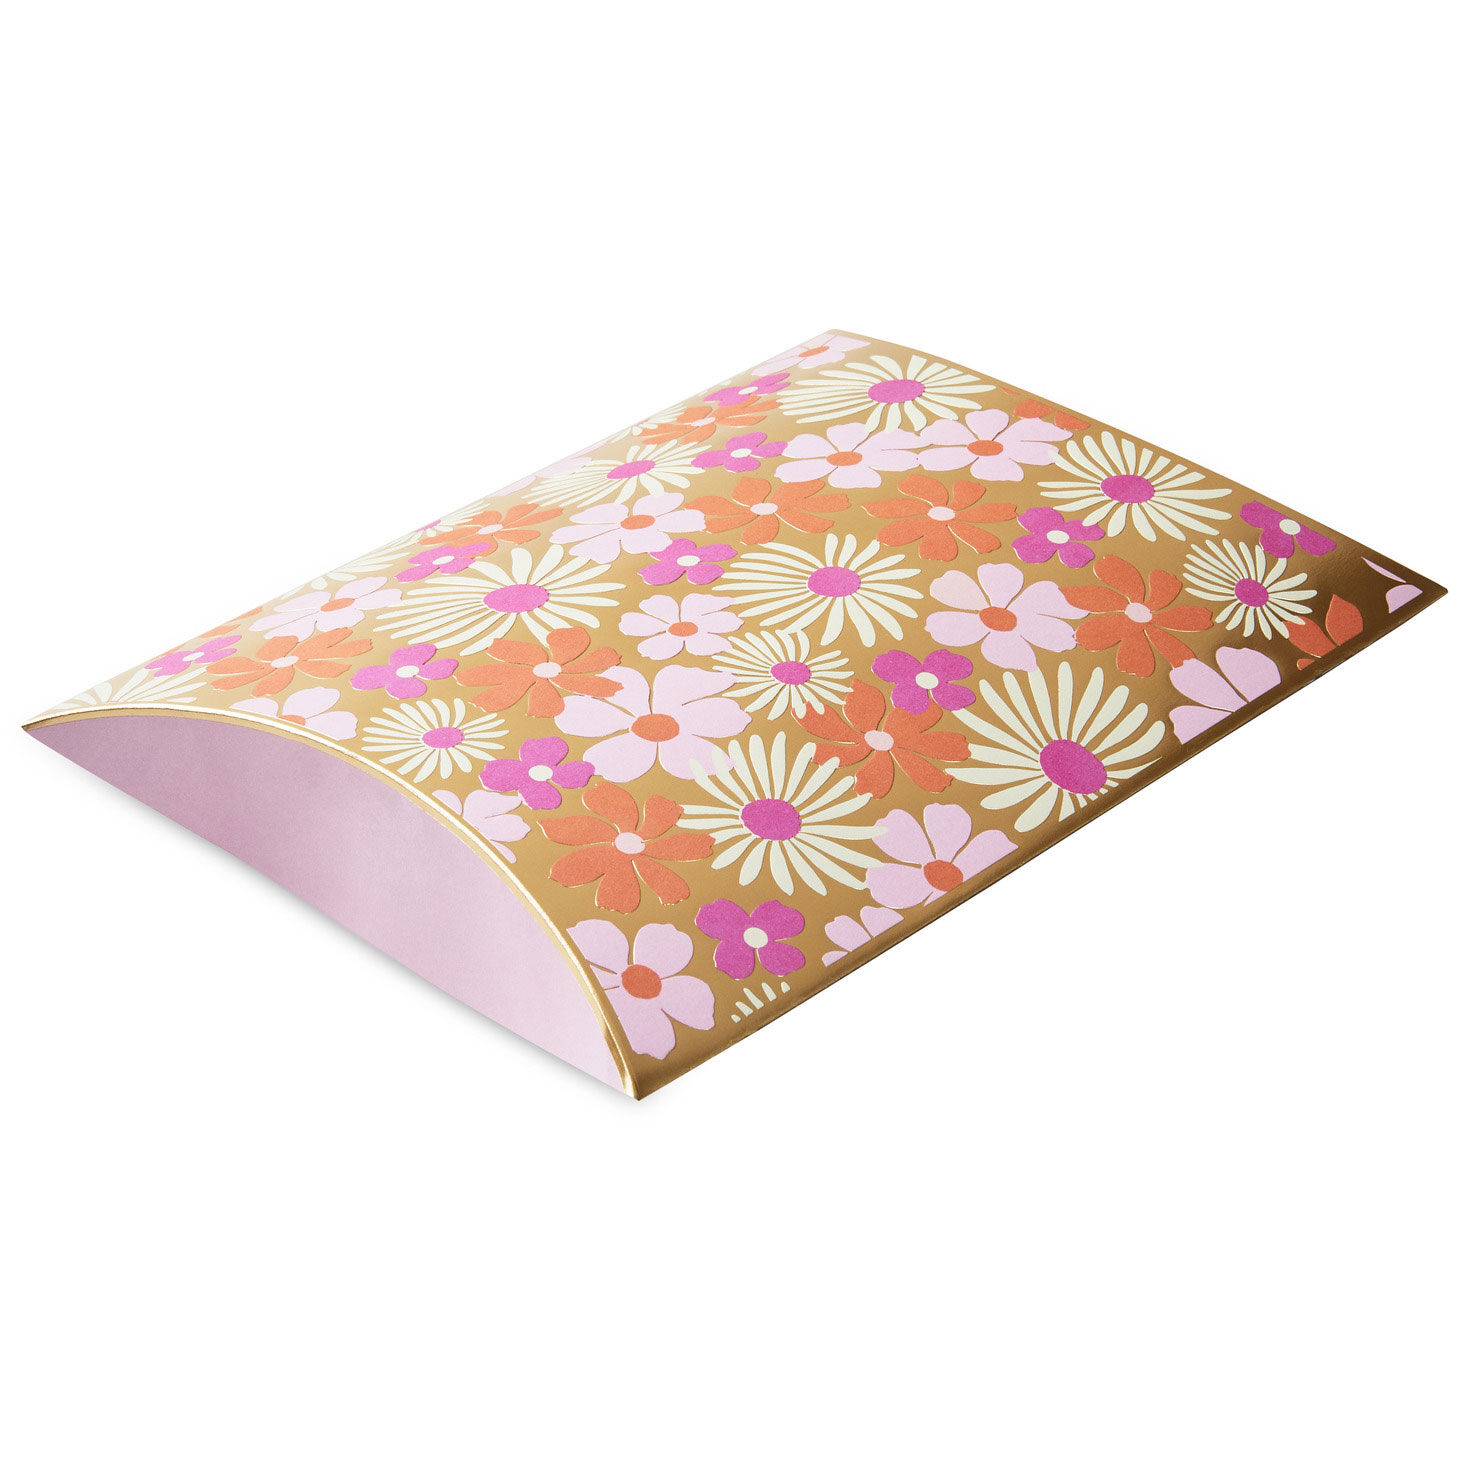 Pink and Orange Floral Pillow Box for only USD 2.49 | Hallmark